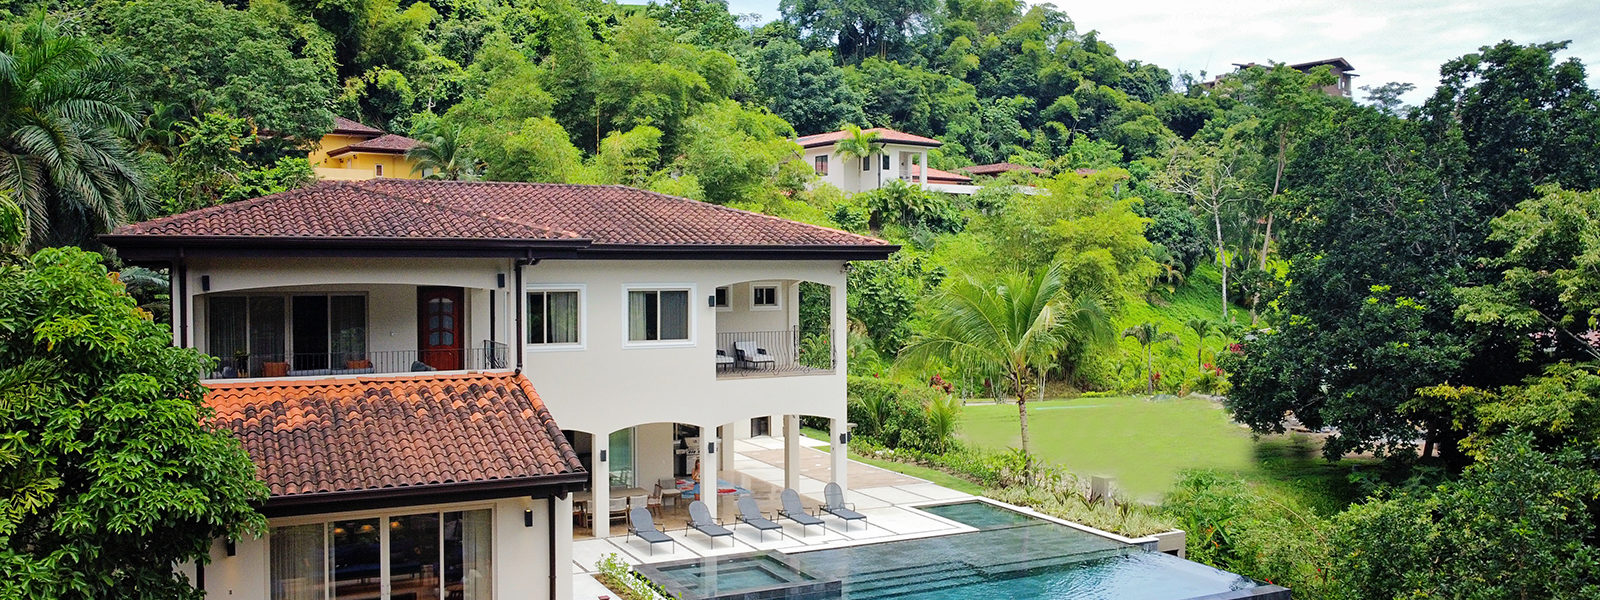 Luxury vacation villa secluded within the exclusive, gated community of Eco Golf Estates.